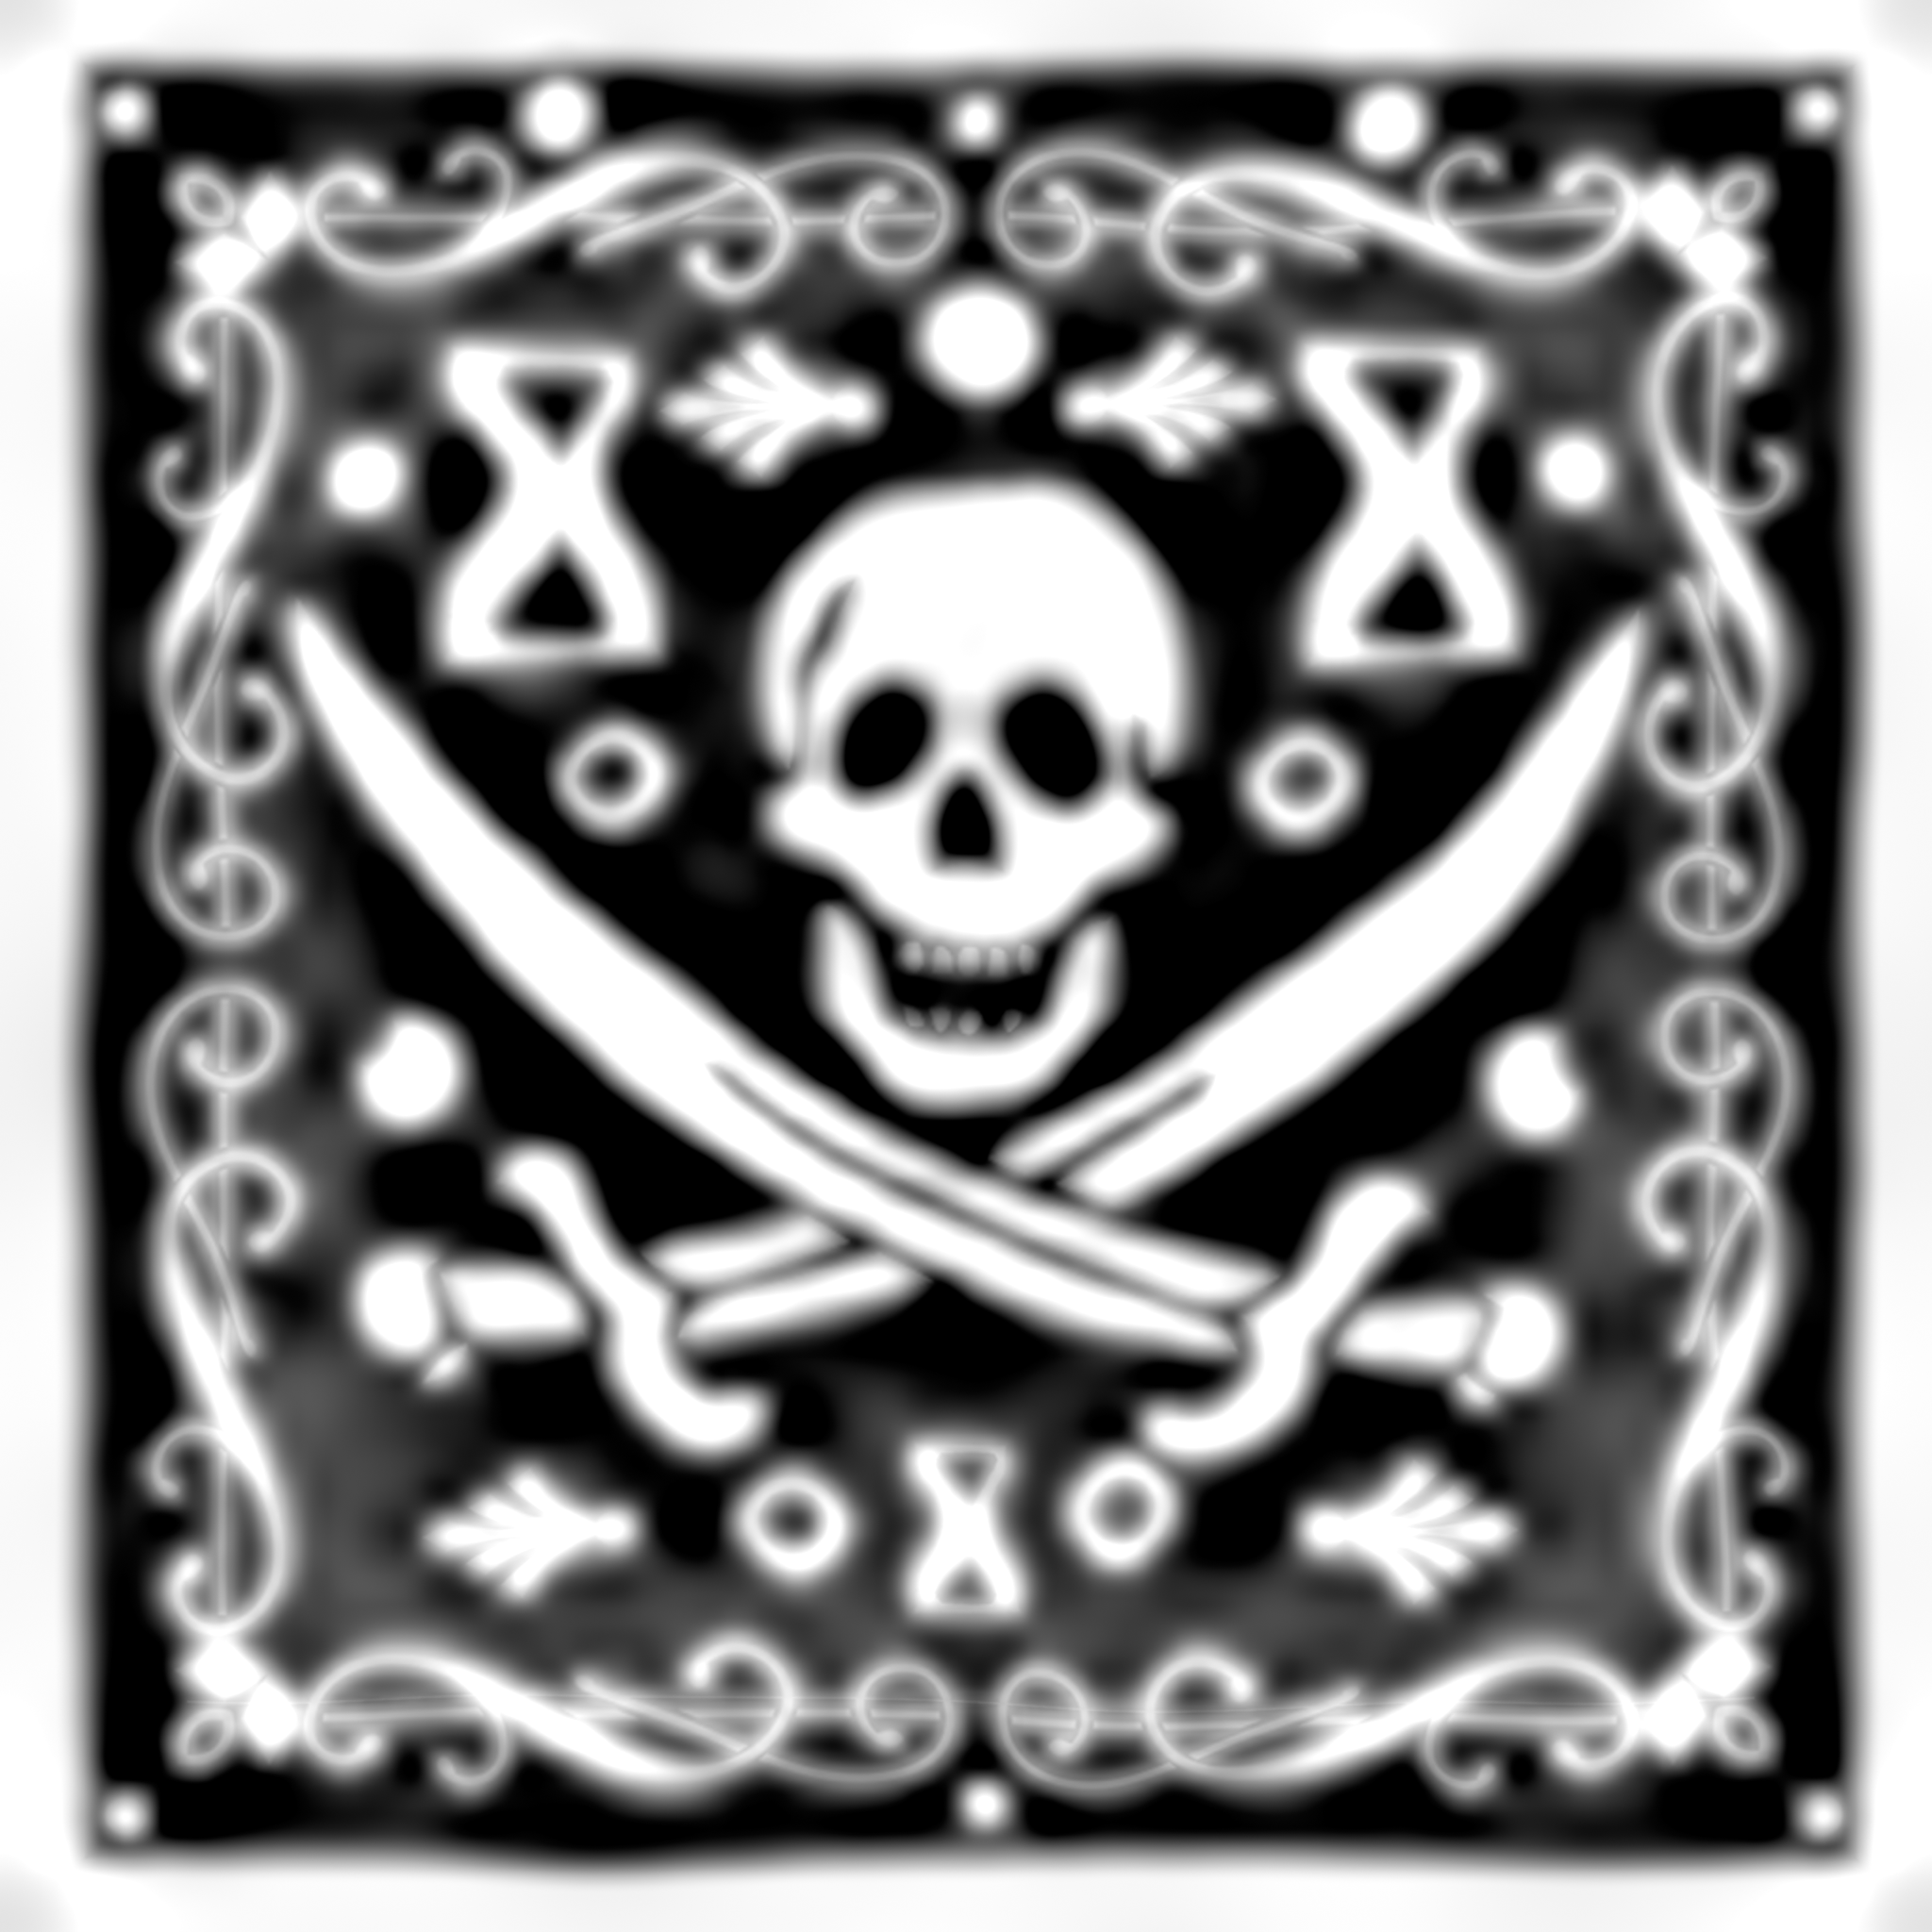 Assets/PBR6PIC/4-pirate-gold/pirate-gold_height.png